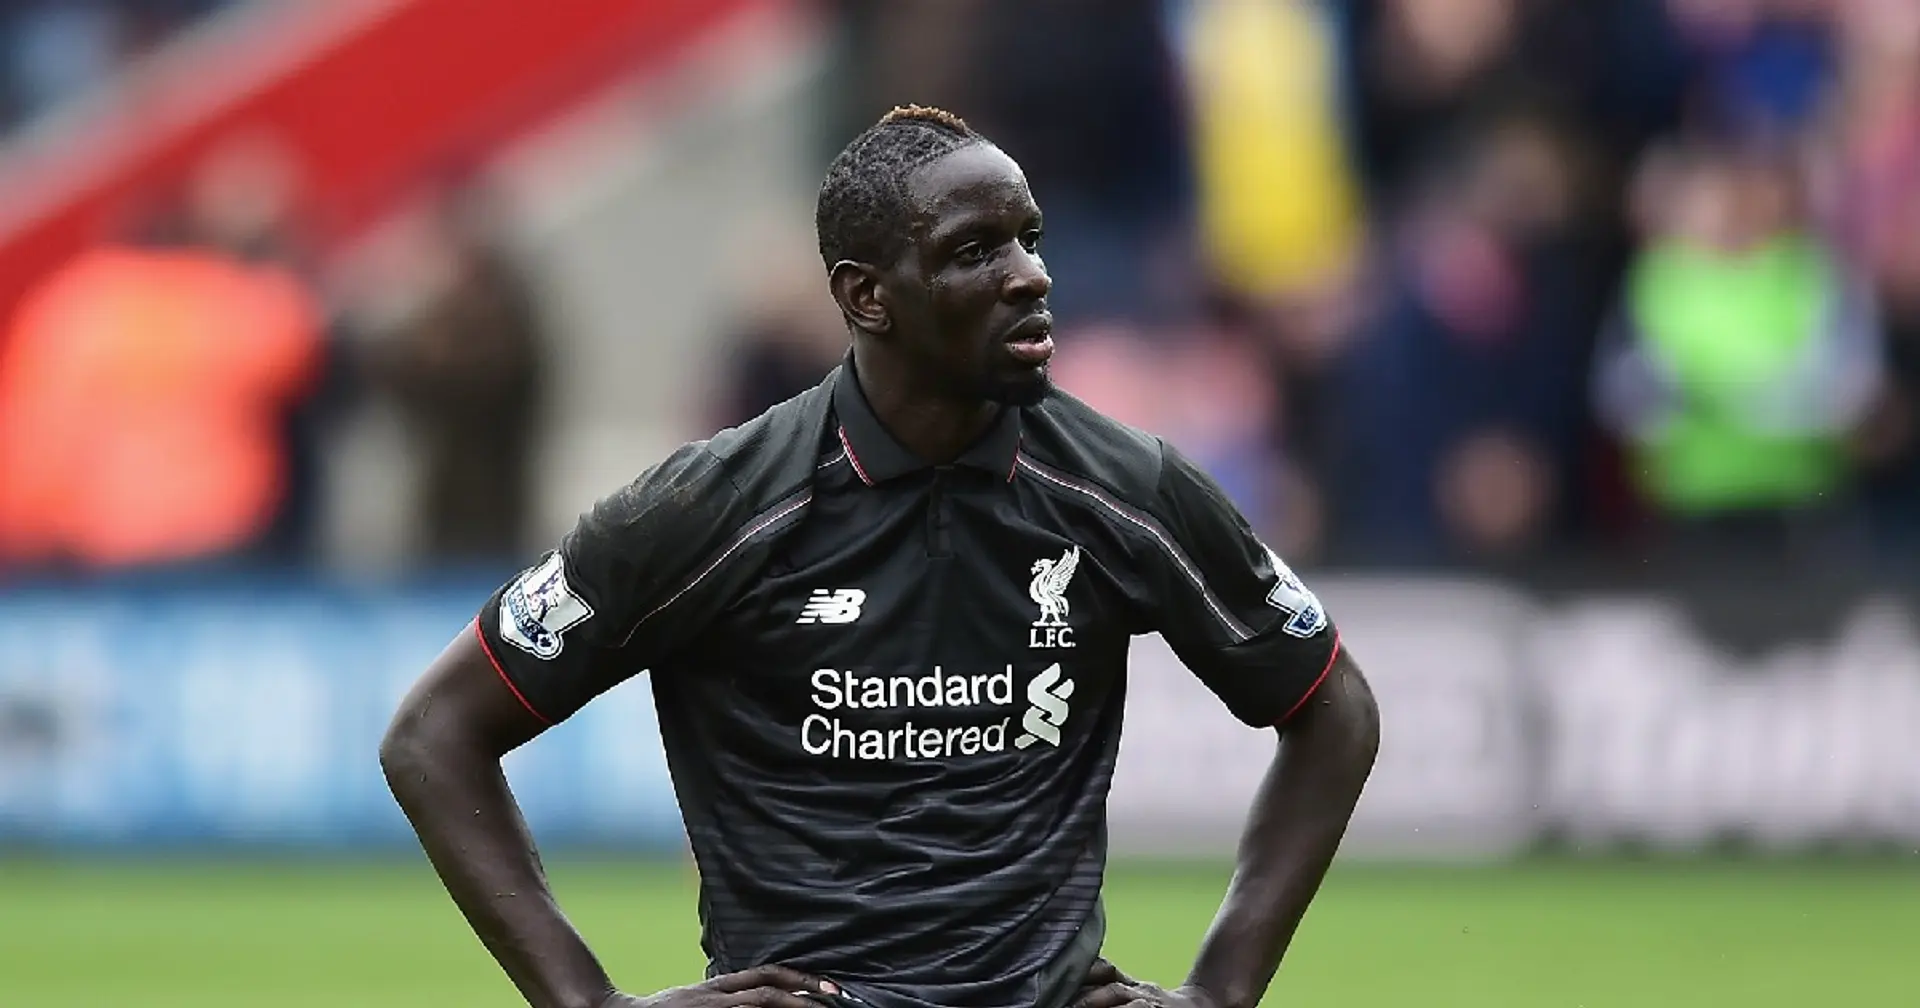 Sakho issued apology by WADA on doping claims, paid significant amount in damages